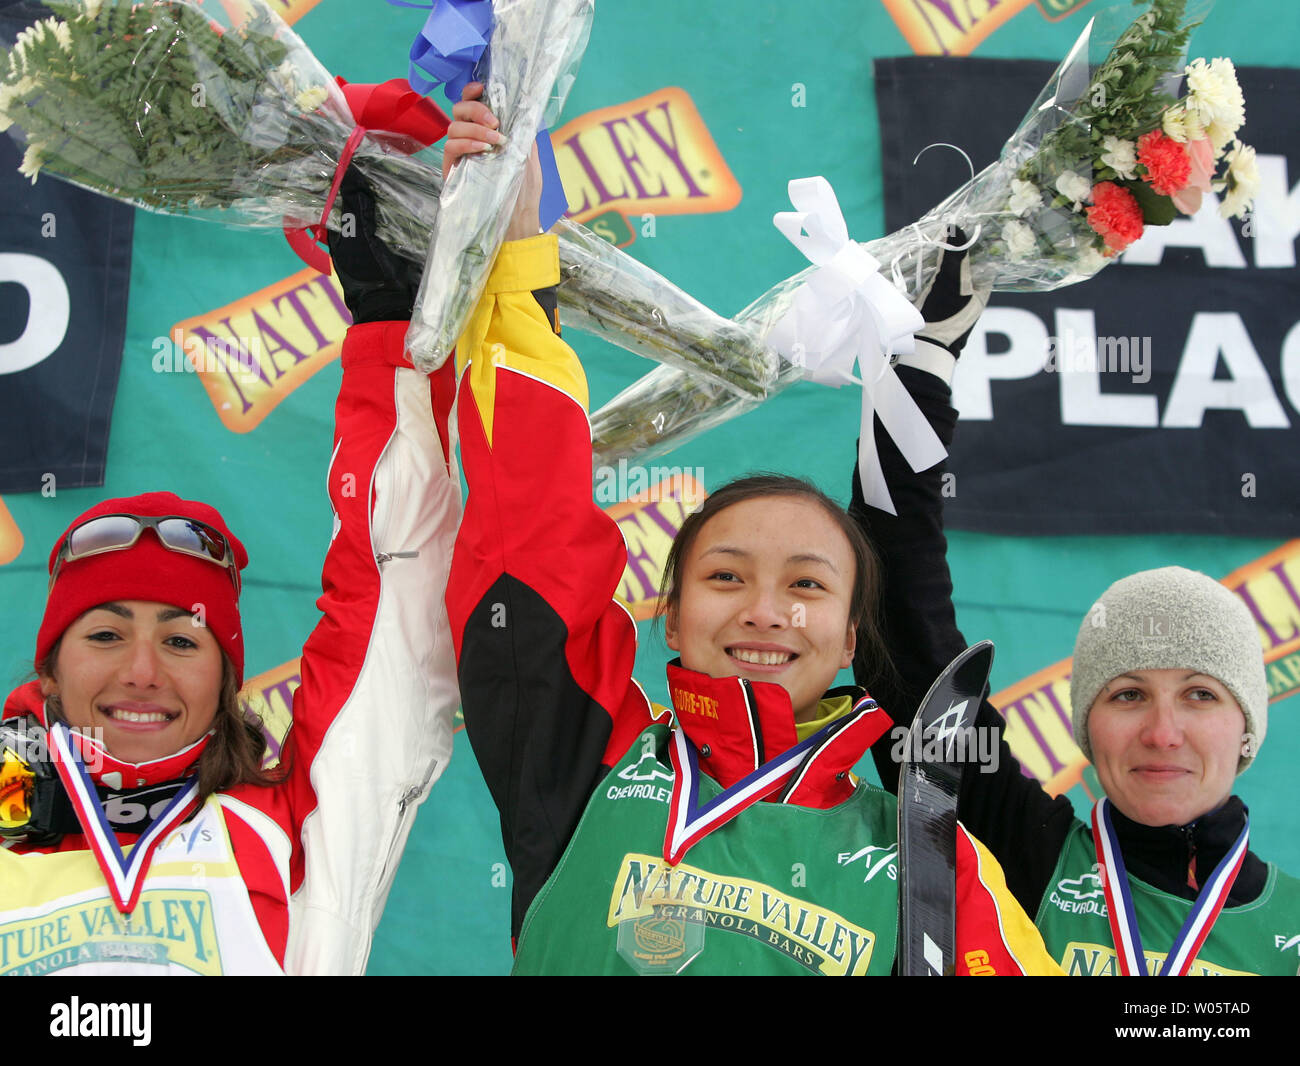 (L-R) Women's aerialists Lydia Ierodiaconou of Australia, Nina Li of China, and Alla Tsuper of Belarus celebrate winning silver, gold, and bronze medals, respectively, at the Freestyle World Cup event in Lake Placid, NY on January 16, 2005.  Miss Li, who comes from Shenyang, China, totalled 186.72 points in two jumps to win over #1-ranked Ierodiaconou (186.01) and Tsuper (1176.19). (UPI Photo/Grace Chiu) Stock Photo